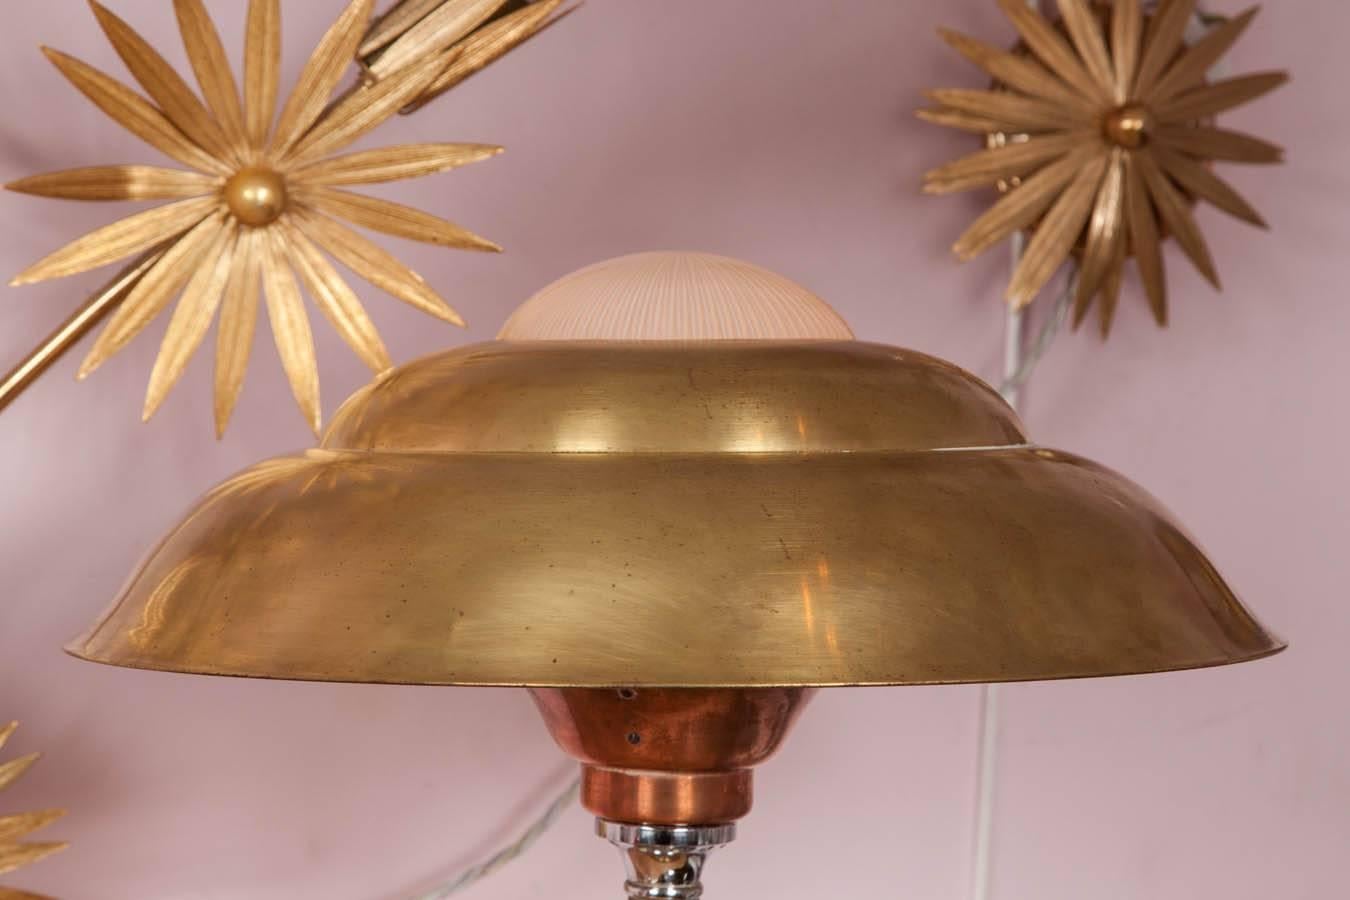 Elegantly shaped Italian table lamp in brass, copper, chrome and glass. Three tiered domed shade of brass and glass sits on a curved stem, supported by brass and chrome base.